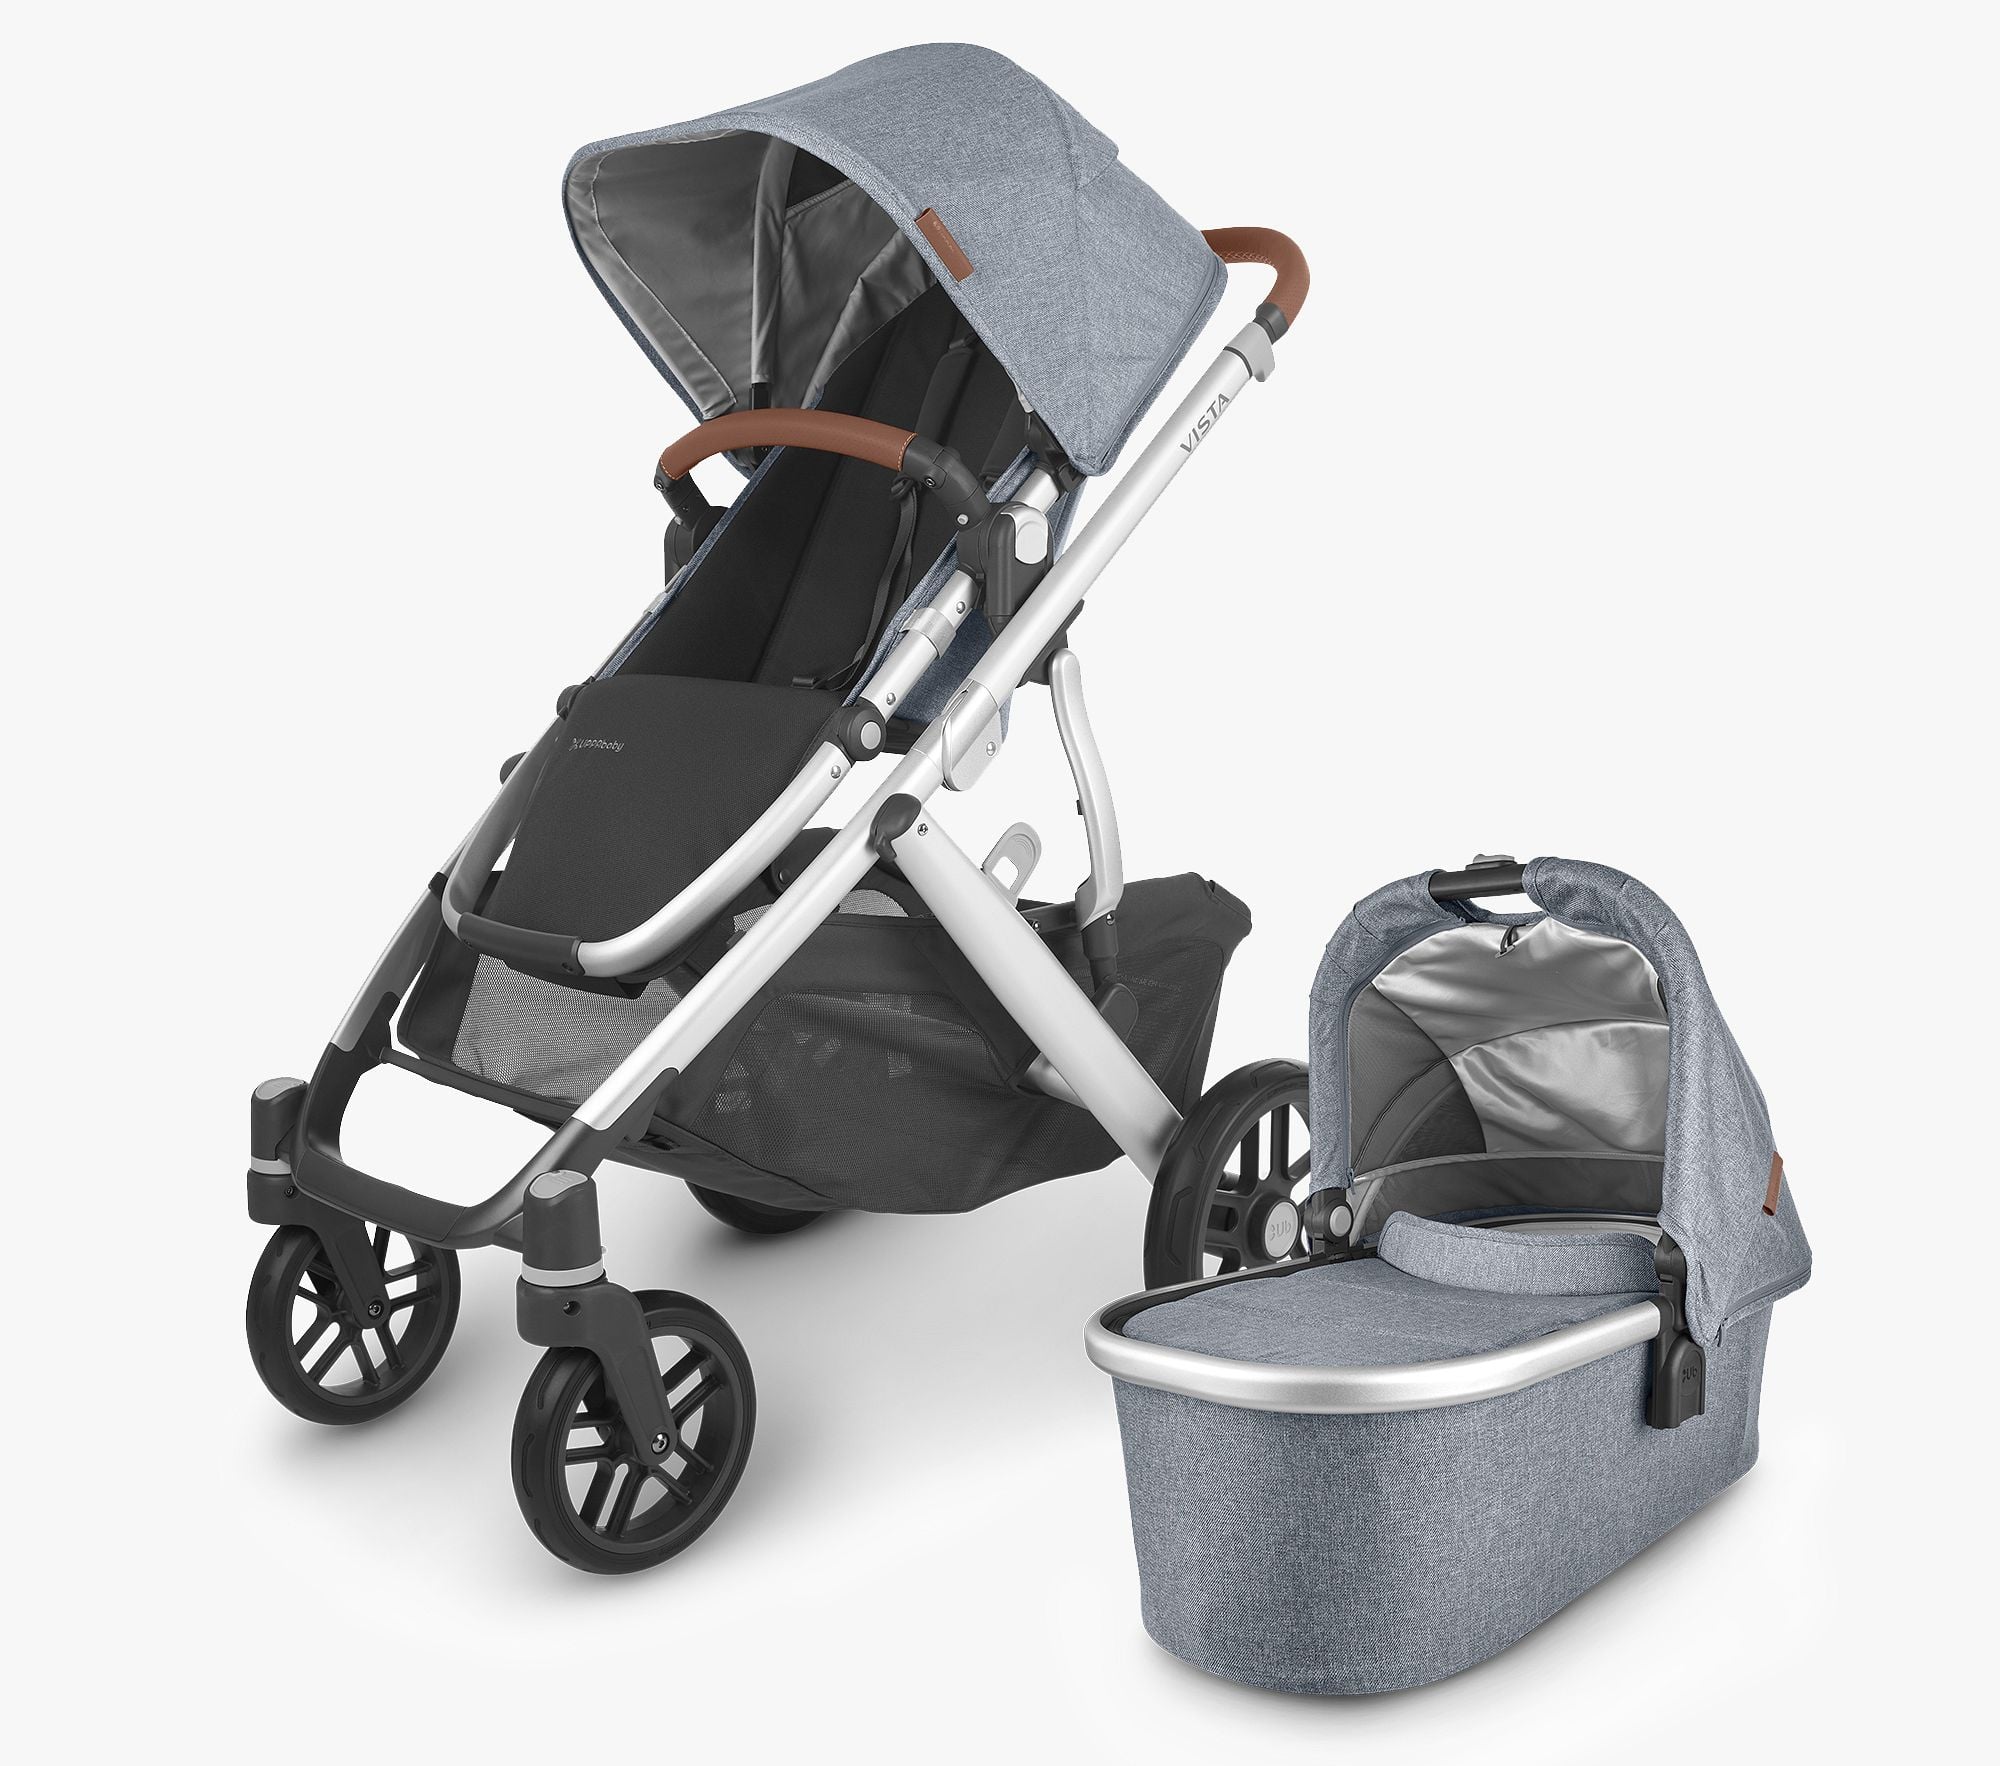 <p><a href="https://www.potterybarnkids.com/products/uppababy-vista-v2-stroller/">BUY NOW</a></p><p>$1,000</p><p><a href="https://www.potterybarnkids.com/products/uppababy-vista-v2-stroller/" class="ga-track"><strong>UPPAbaby Vista V2 Stroller</strong></a> ($1,000) </p> <p>This stroller starts off as a single ride for one child, but can easily accommodate two or three kids with the addition of a <a href="https://uppababy.com/product/rumbleseat/" class="ga-track">RumbleSeat</a> and a <a href="https://uppababy.com/product/piggyback/" class="ga-track">PiggyBack ride-along board accessory</a>. The stroller also comes with a bassinet attachment that can be detached with one hand, so you can easily carry your sleeping infant into the house. Still on the fence? Check out our full <a href="https://www.popsugar.com/family/is-uppababy-vista-worth-it-47843700" class="ga-track">review of the UPPAbaby Vista here</a>.</p>